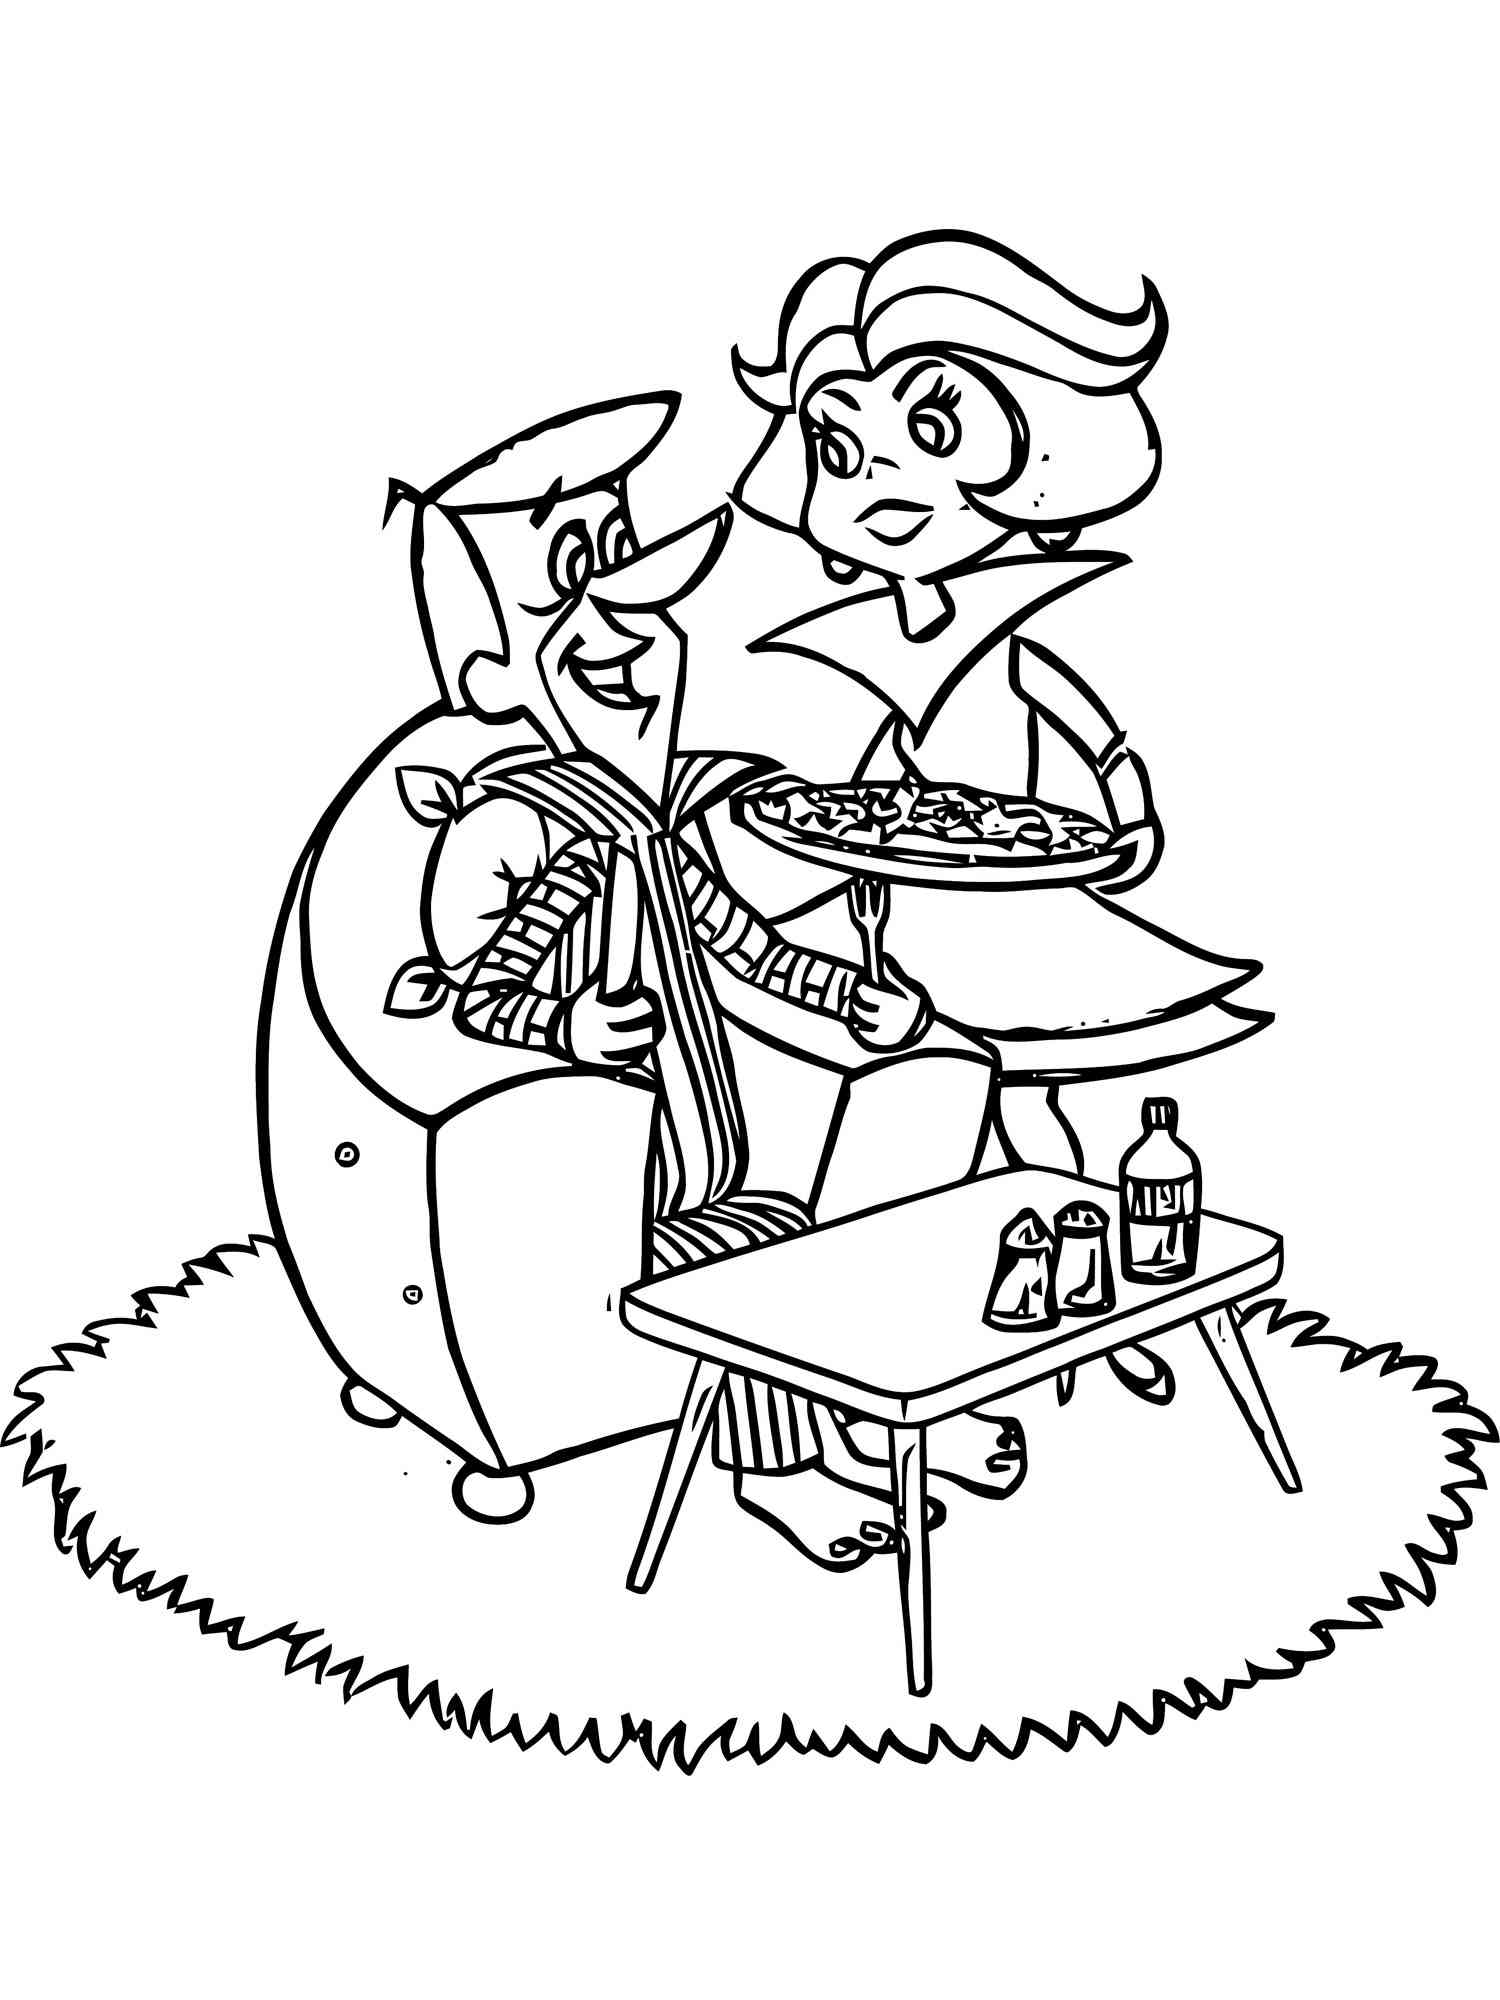 Printable Coloring Pages For The Jetsons